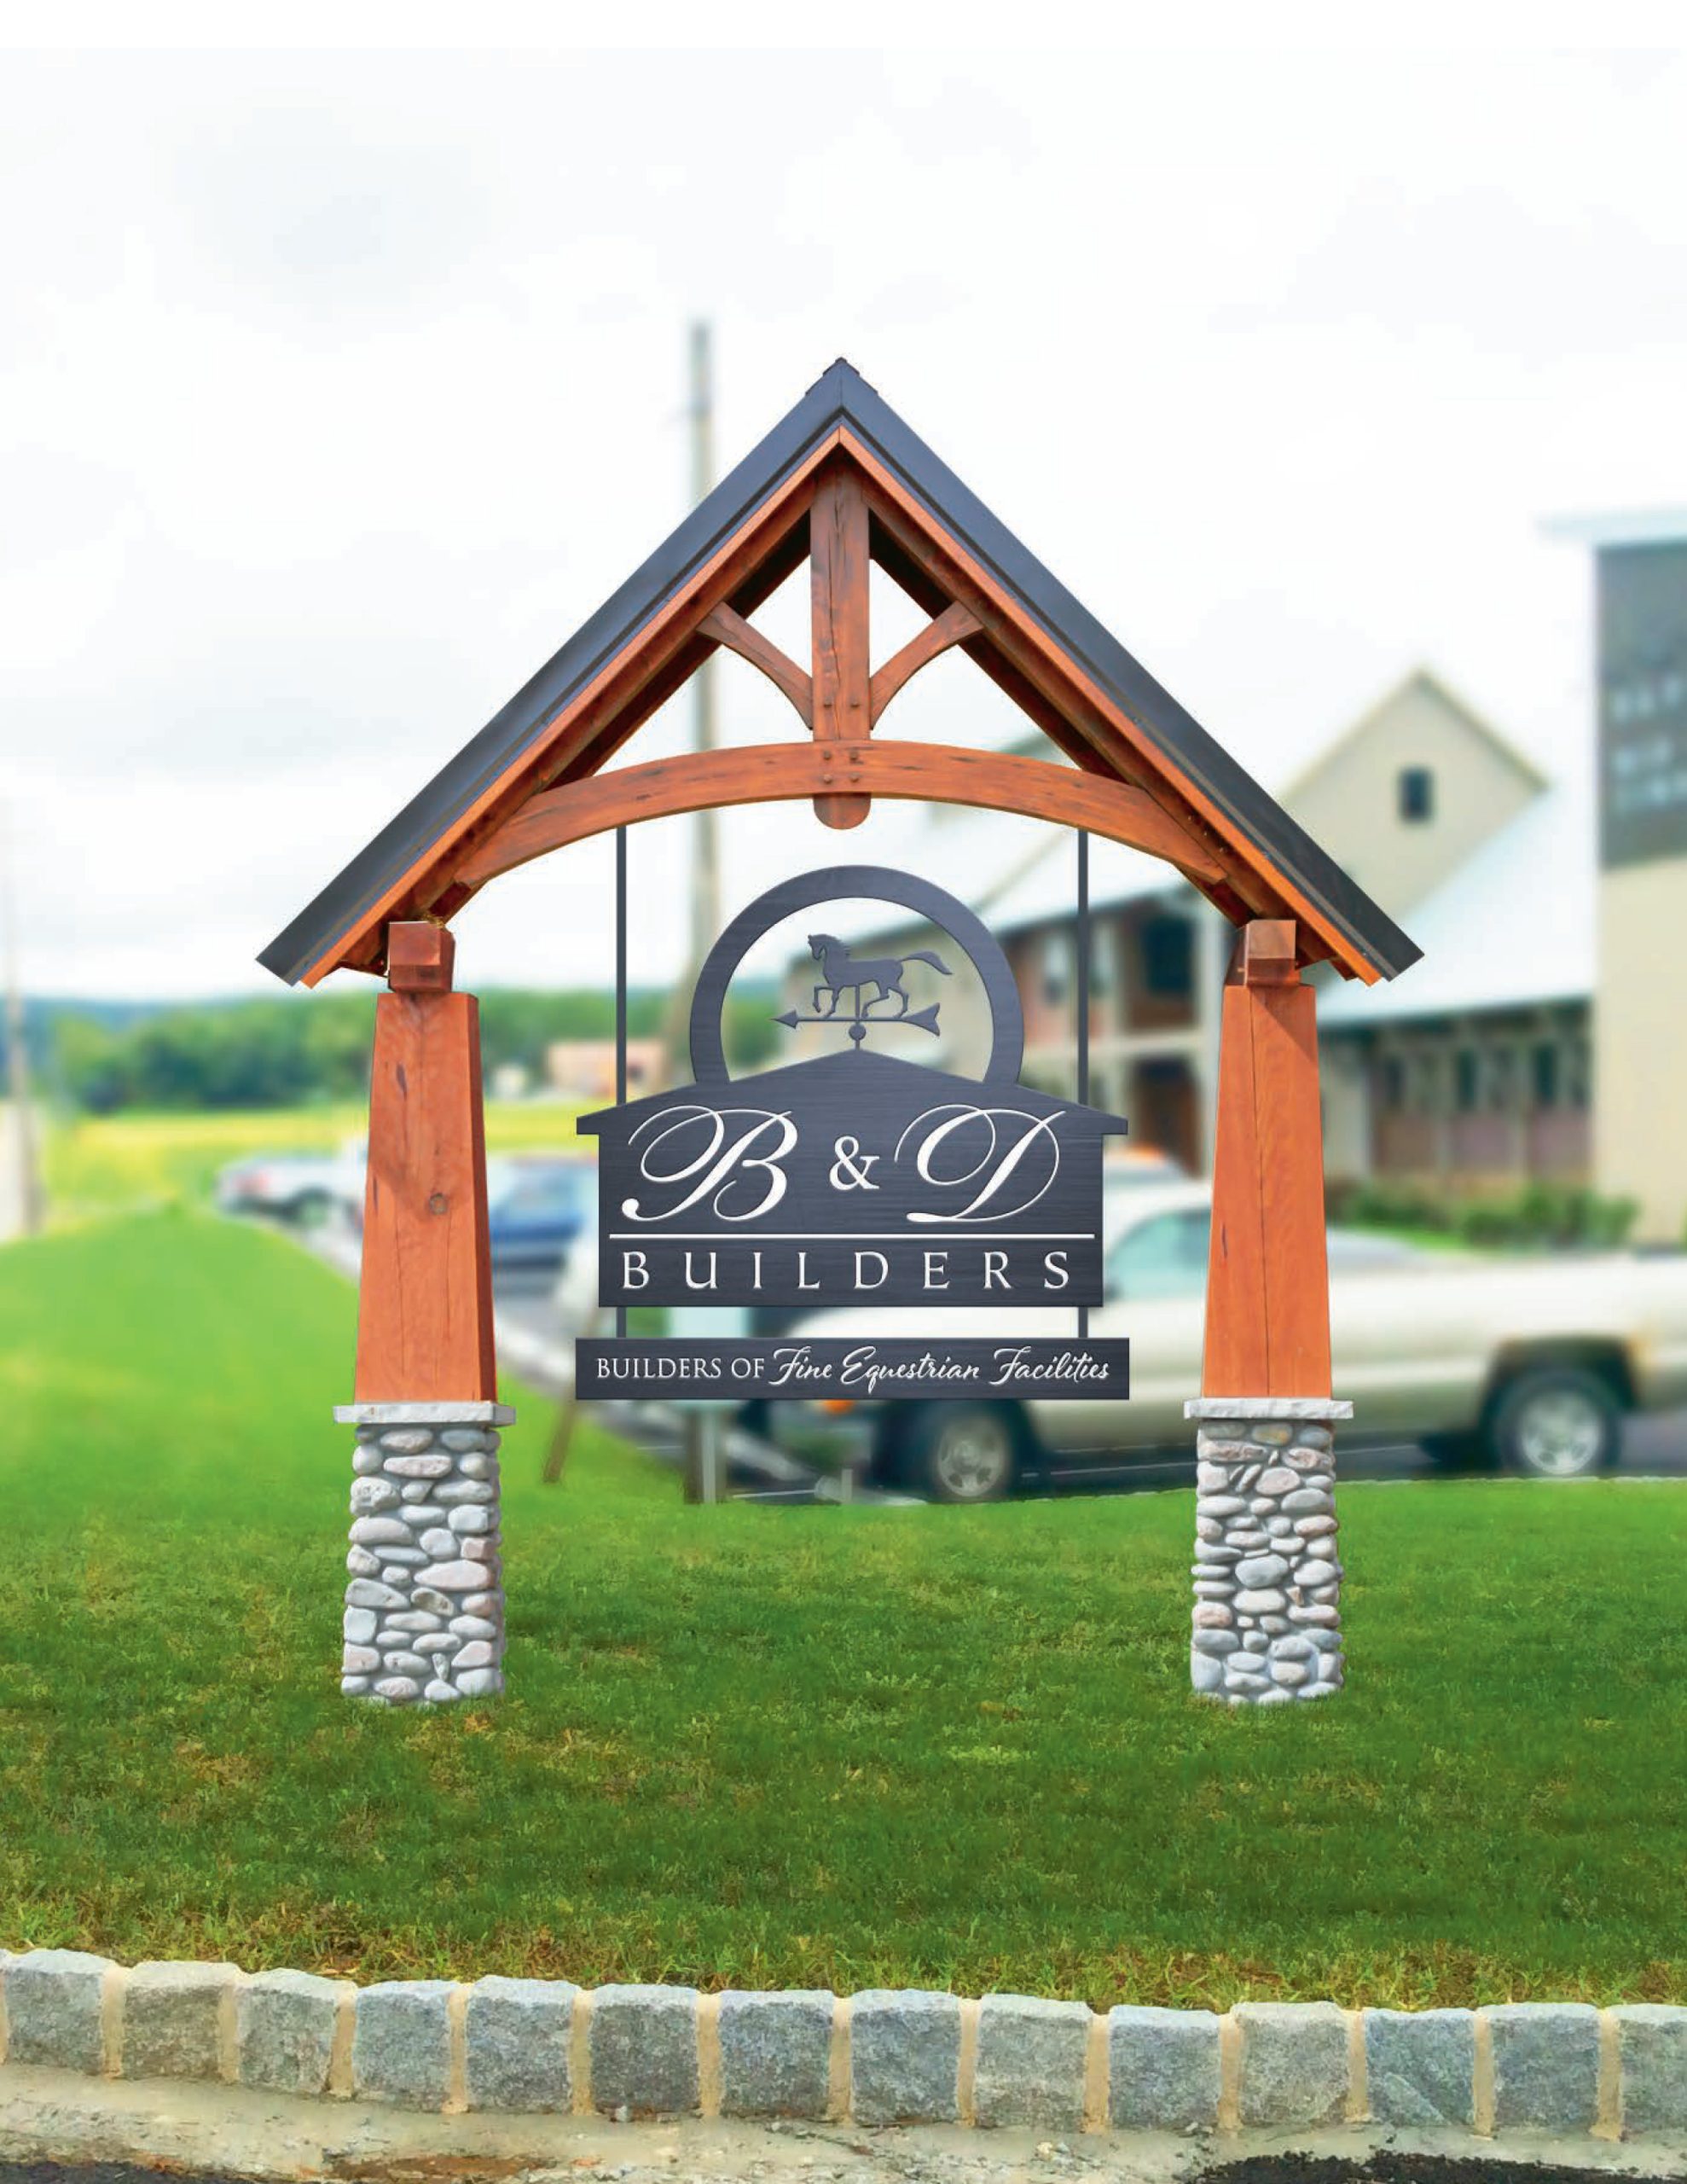 b-and-d-builders-outdoor-signage-design-mockup-by-signage-design-company-scaled